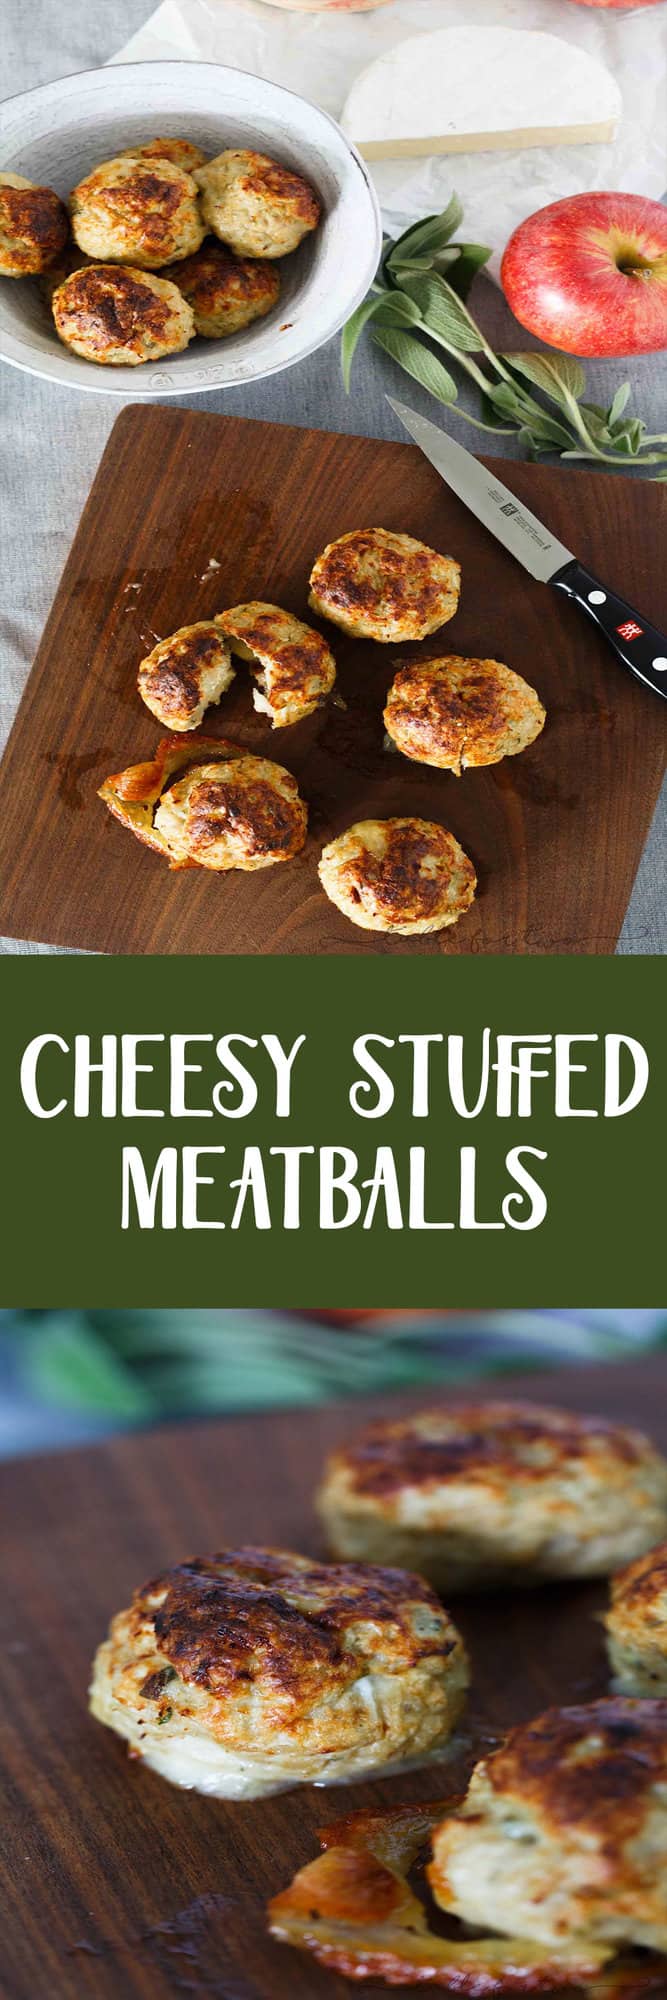 Stuffing anything with cheese automatically makes it exponentially better. These stuffed cheesy chicken apple and sage meatballs give the element of surprise with brie in the center of these!